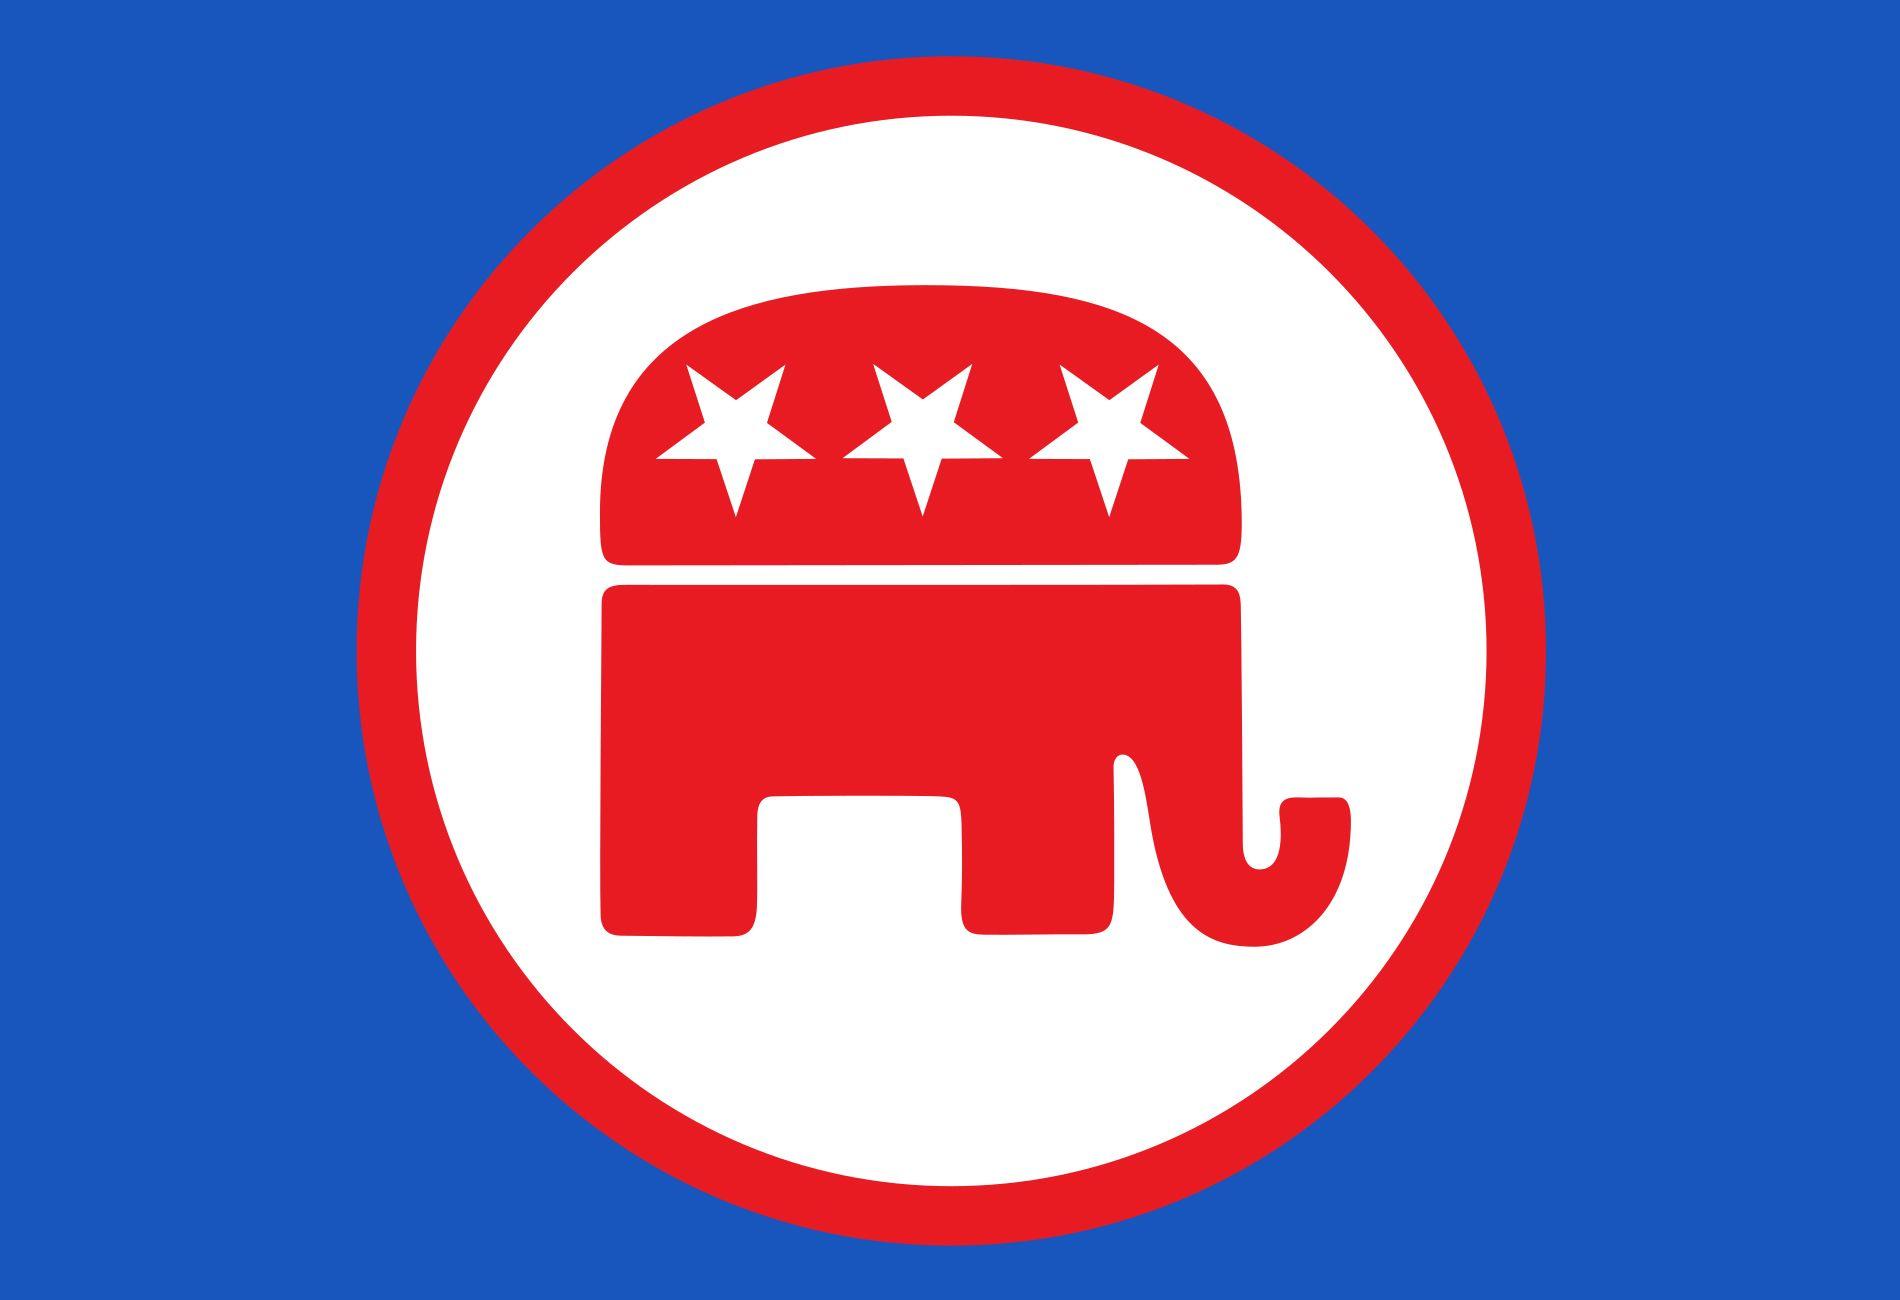 Blue and Red W Logo - Republican Logo, Republican Symbol, Meaning, History and Evolution